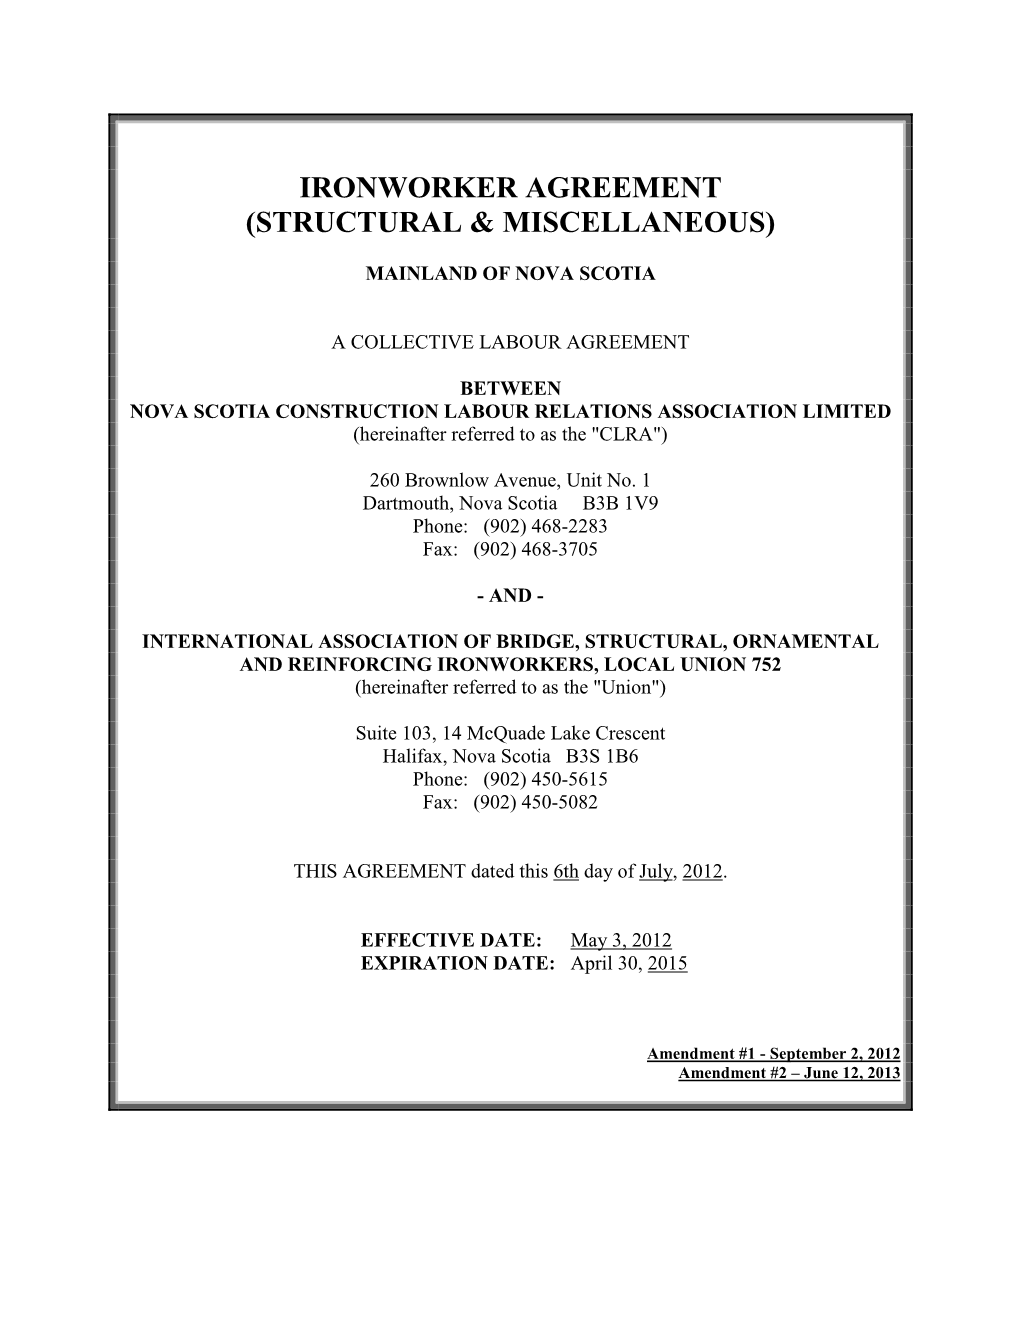 Ironworker Agreement (Structural & Miscellaneous)